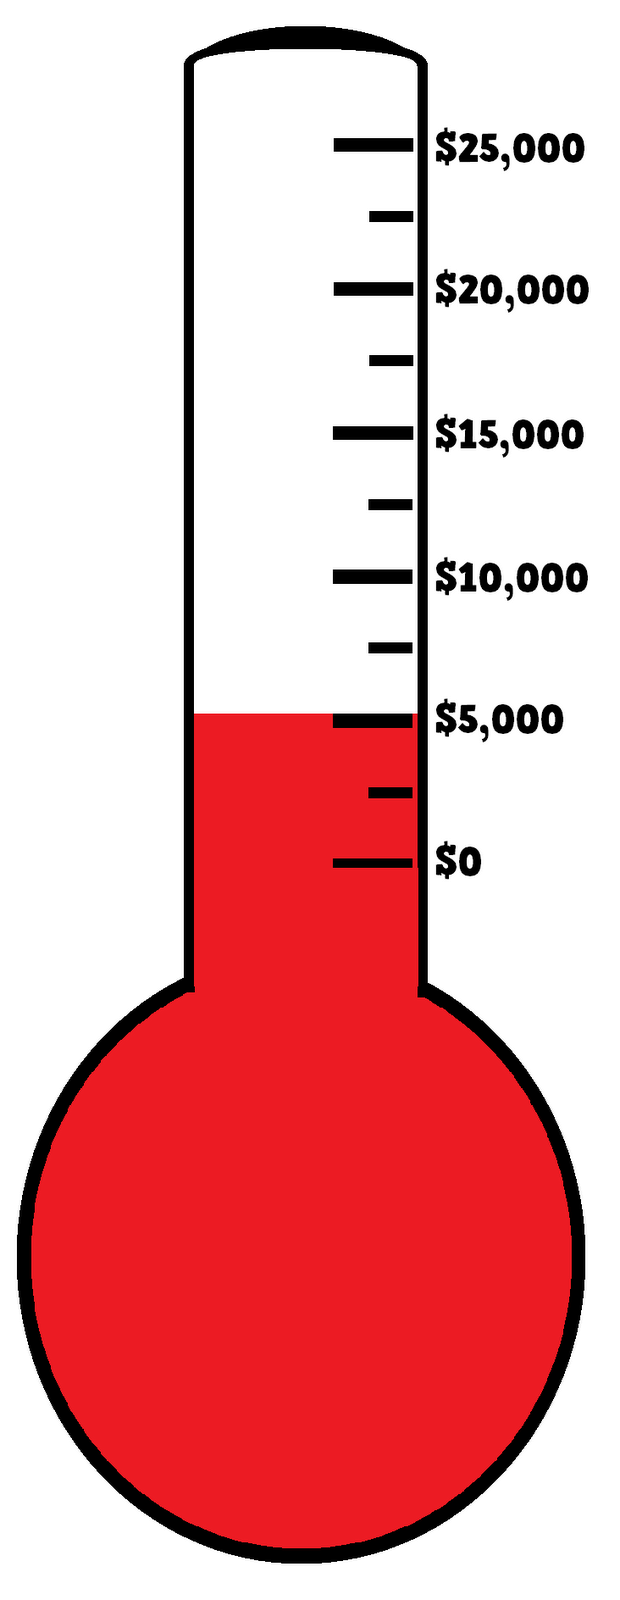 Fundraising thermometer images clipart images gallery for